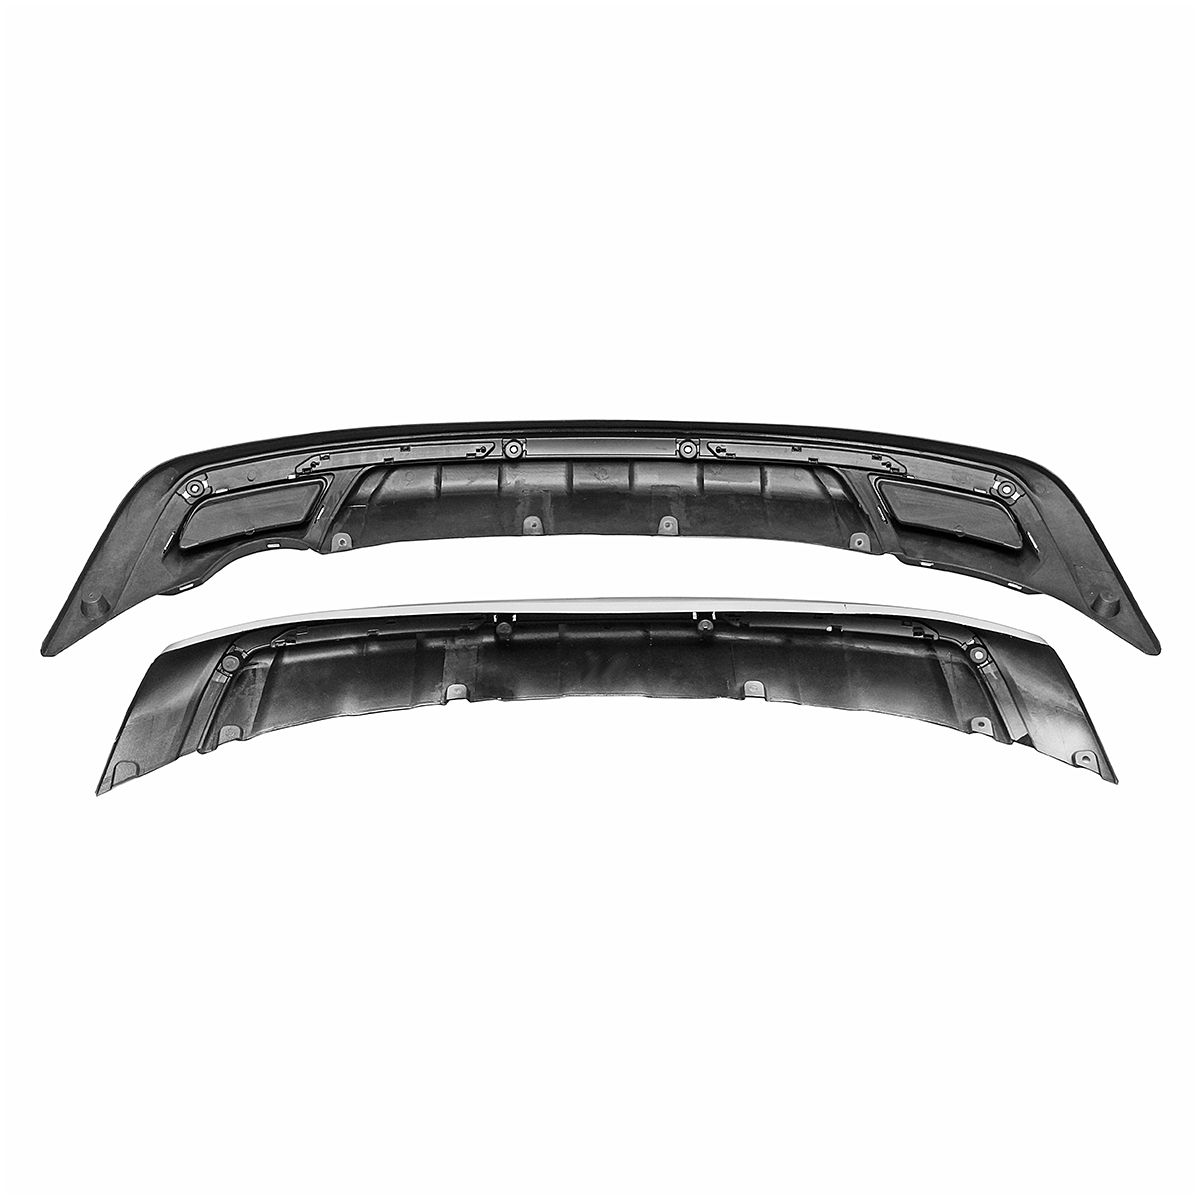 ABS-Front-And-Rear-Bumper-Protect-Guard-Board-Protector-For-KIA-Sportage-R-2010-2014-1708894